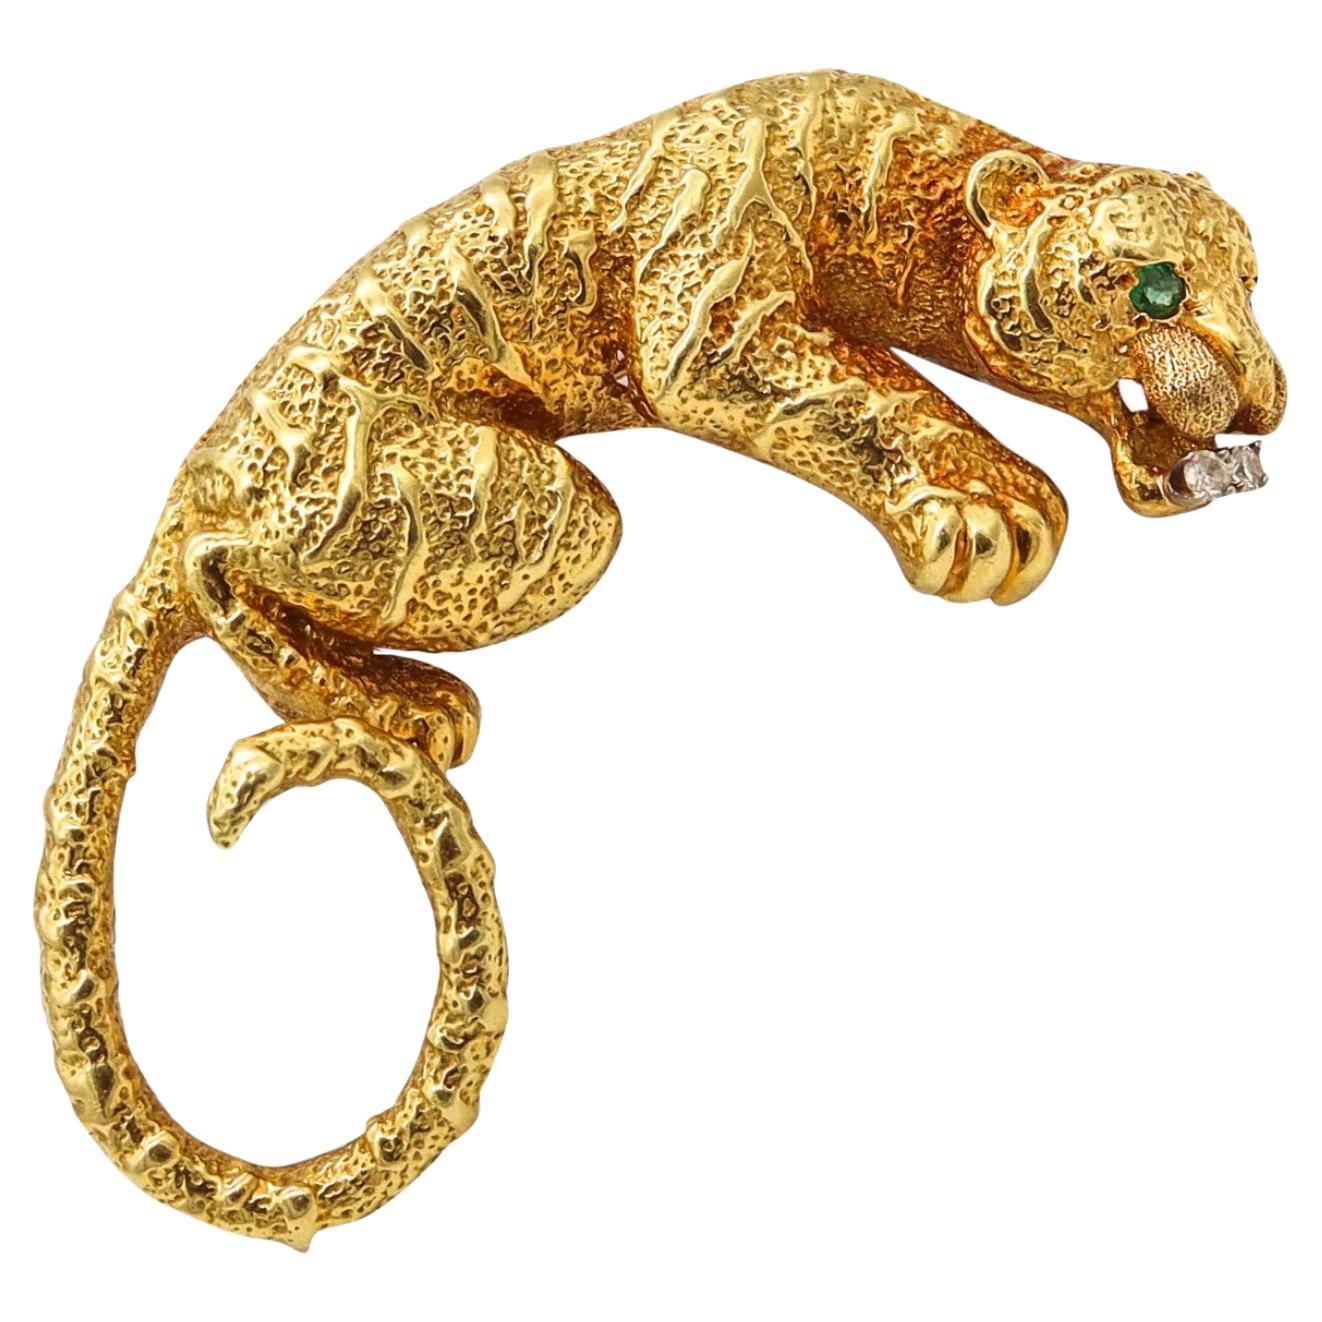 Hammerman Brothers 1970 Tiger Brooch in 18Kt Gold with Emerald and Diamonds